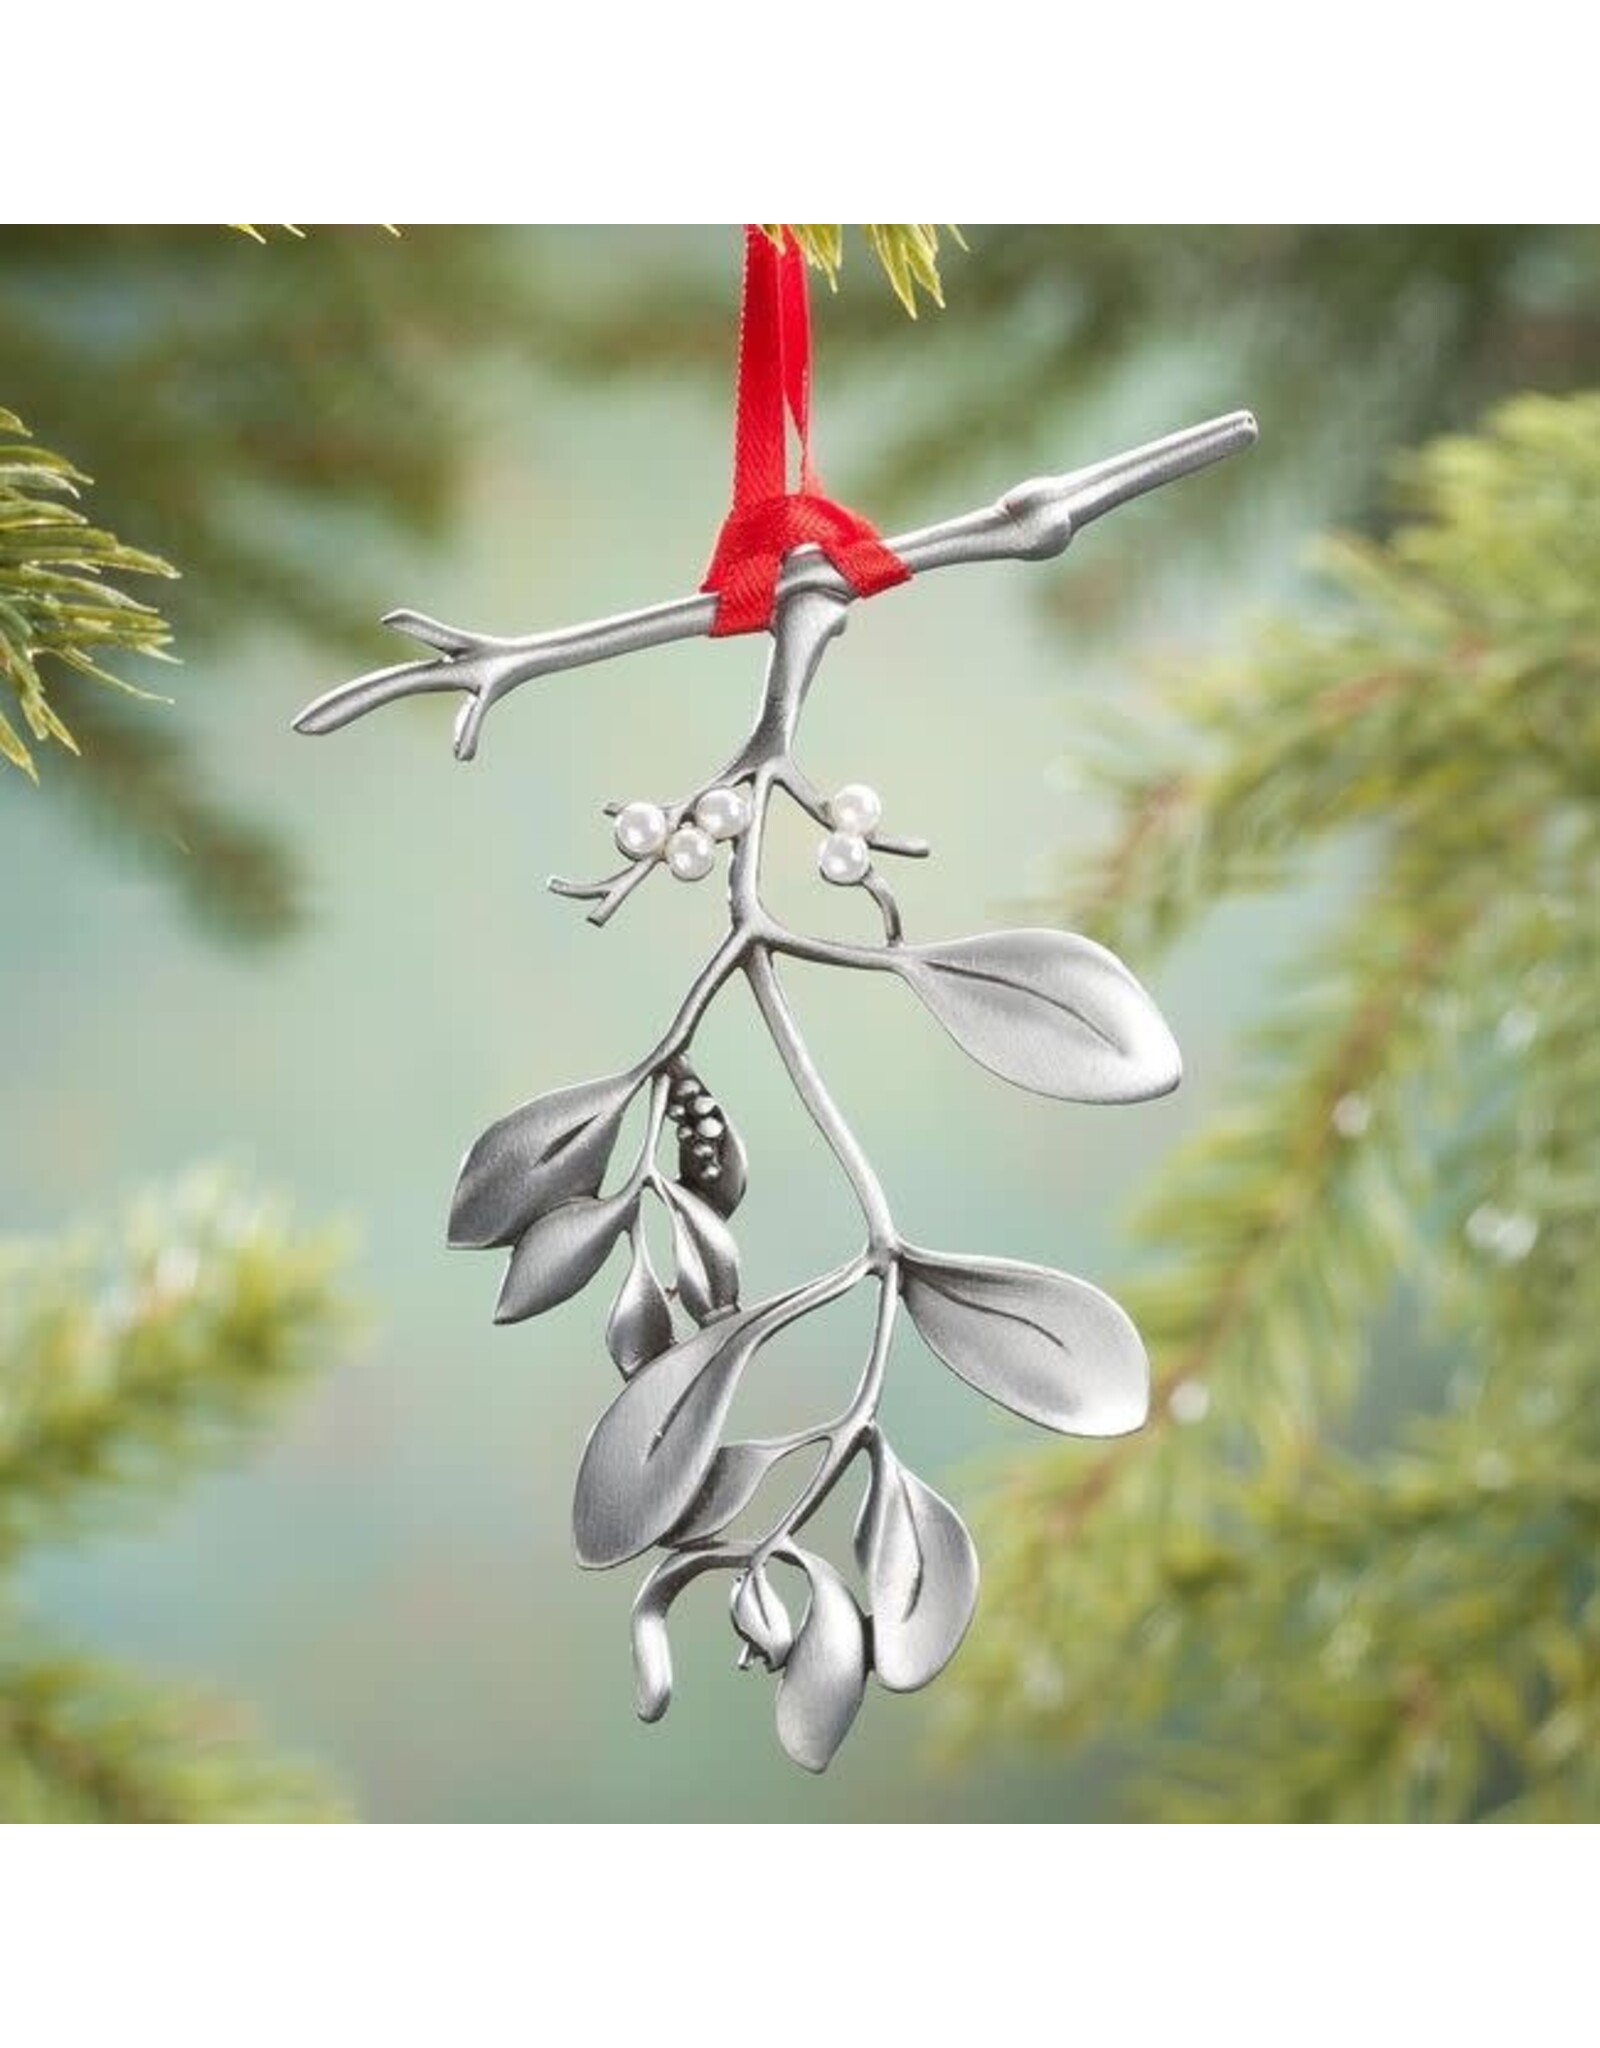 Abbey + CA Gift Mistletoe Ornament with Pearls and Prayer Card